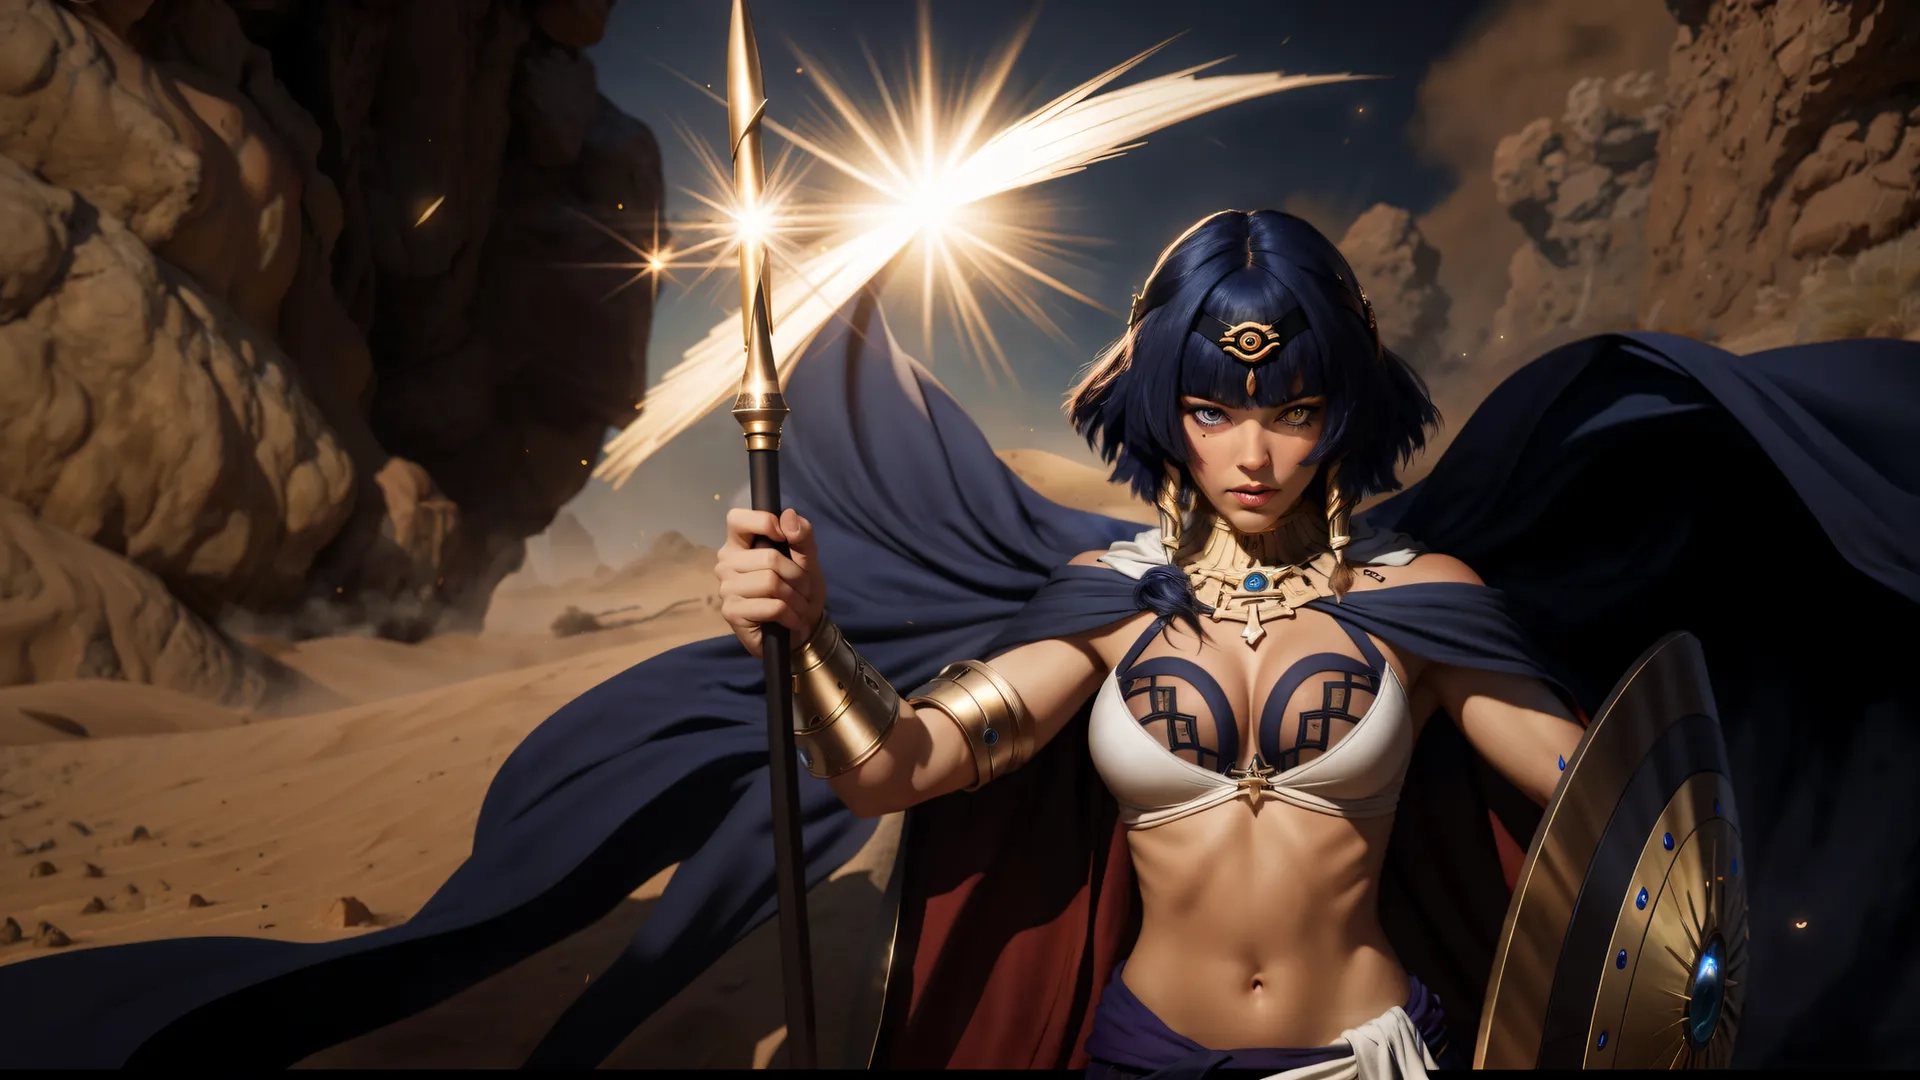 a young woman is dressed as an egyptian warrior with an elaborate sword and cape, standing in front of a rocky landscape with large rocks
